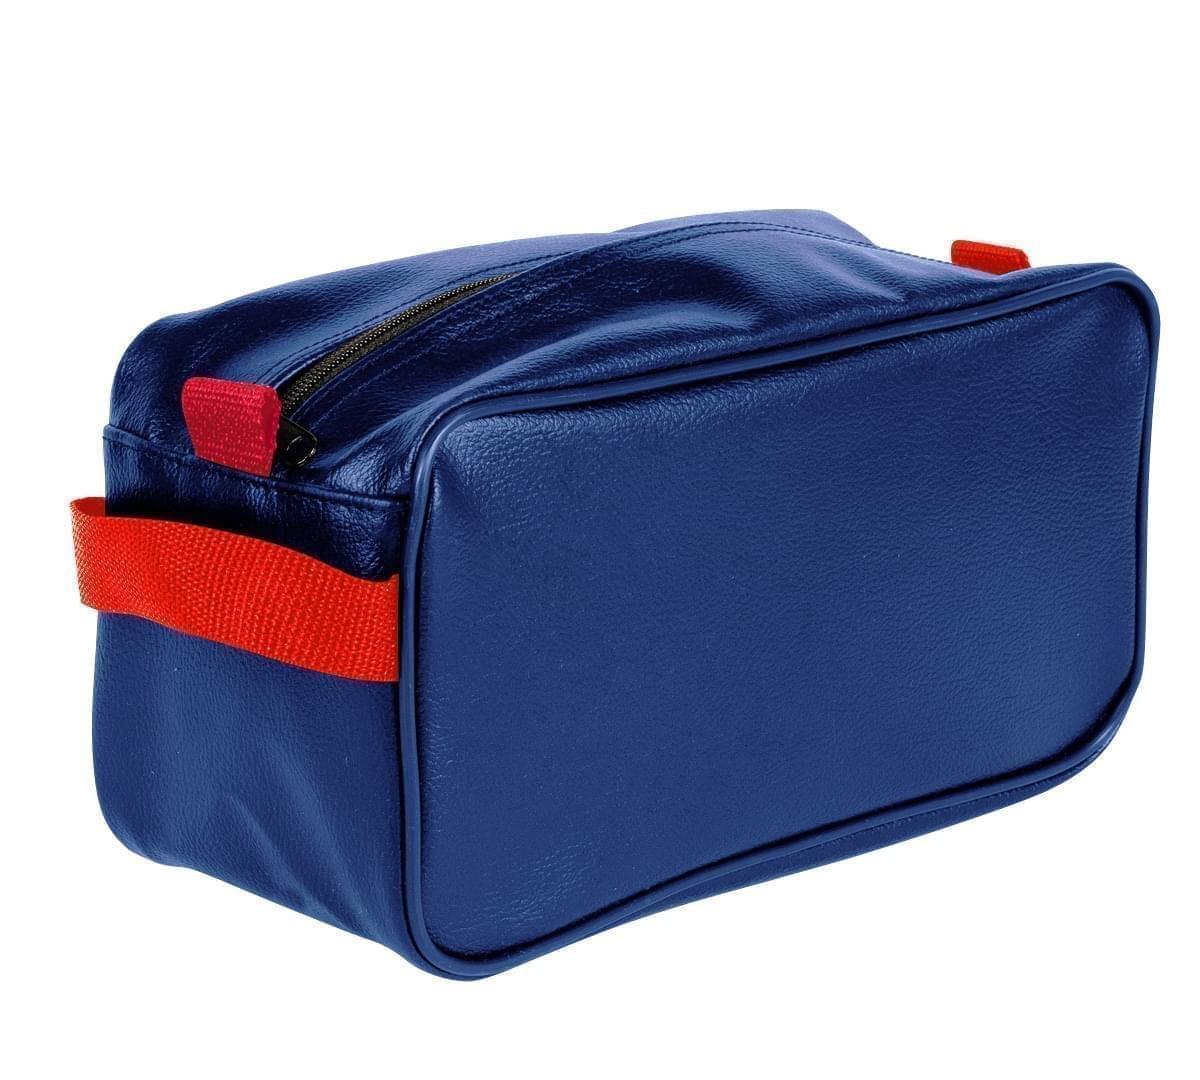 USA Made Cosmetic & Toiletry Cases, Royal Blue-Red, 3000996-A02